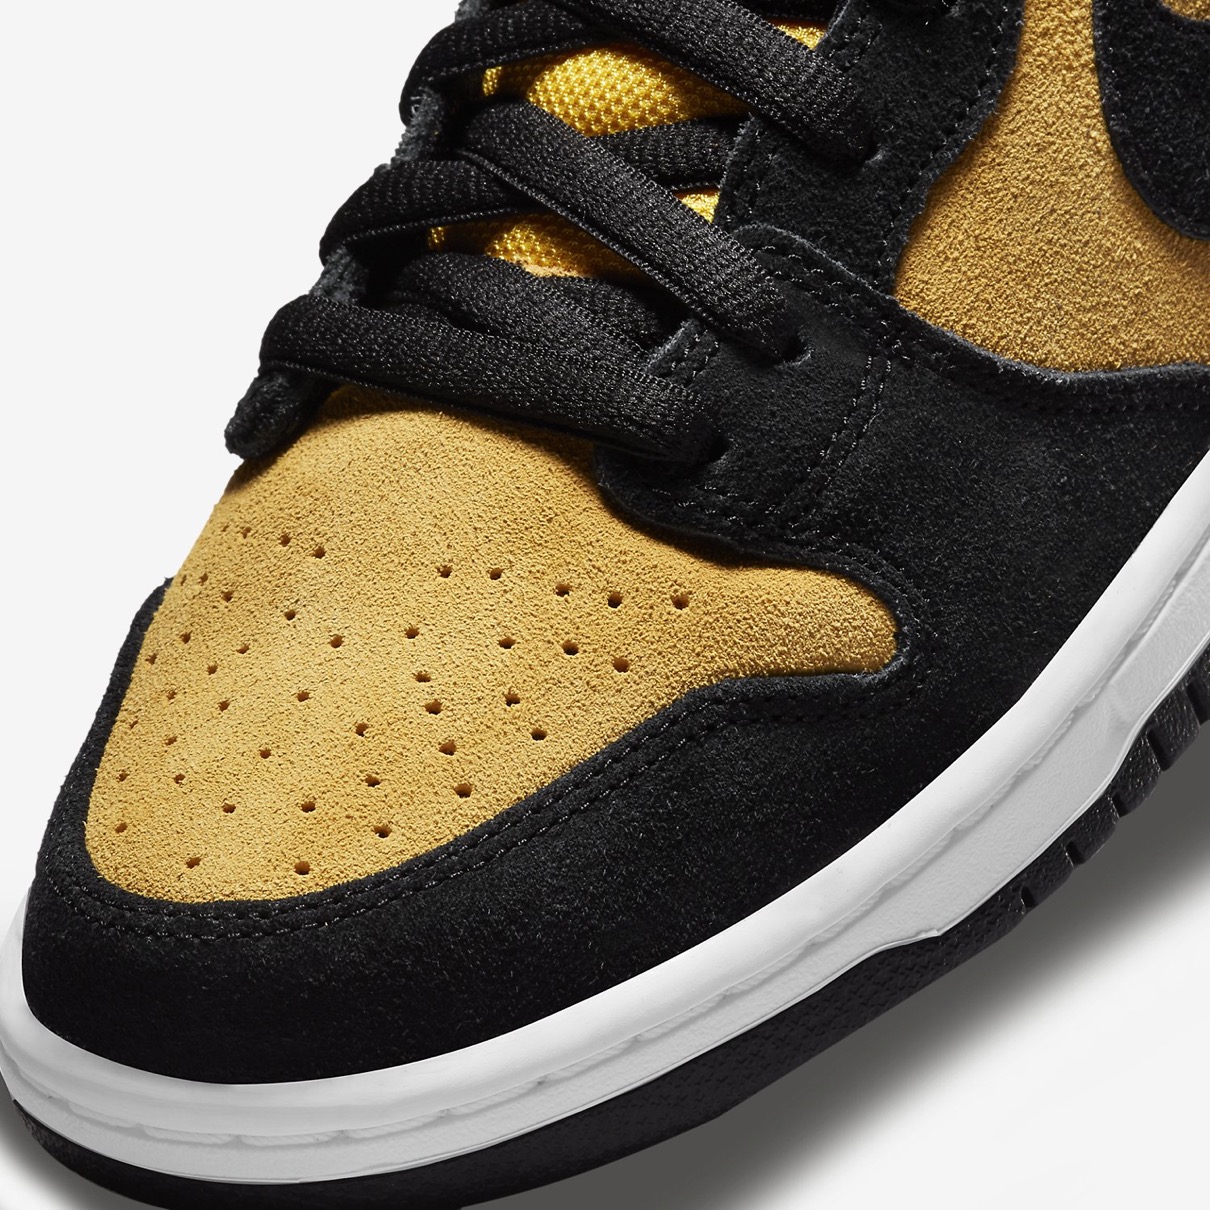 Nike SB】Dunk High Pro “Maize and Black”が国内7月2日より発売予定